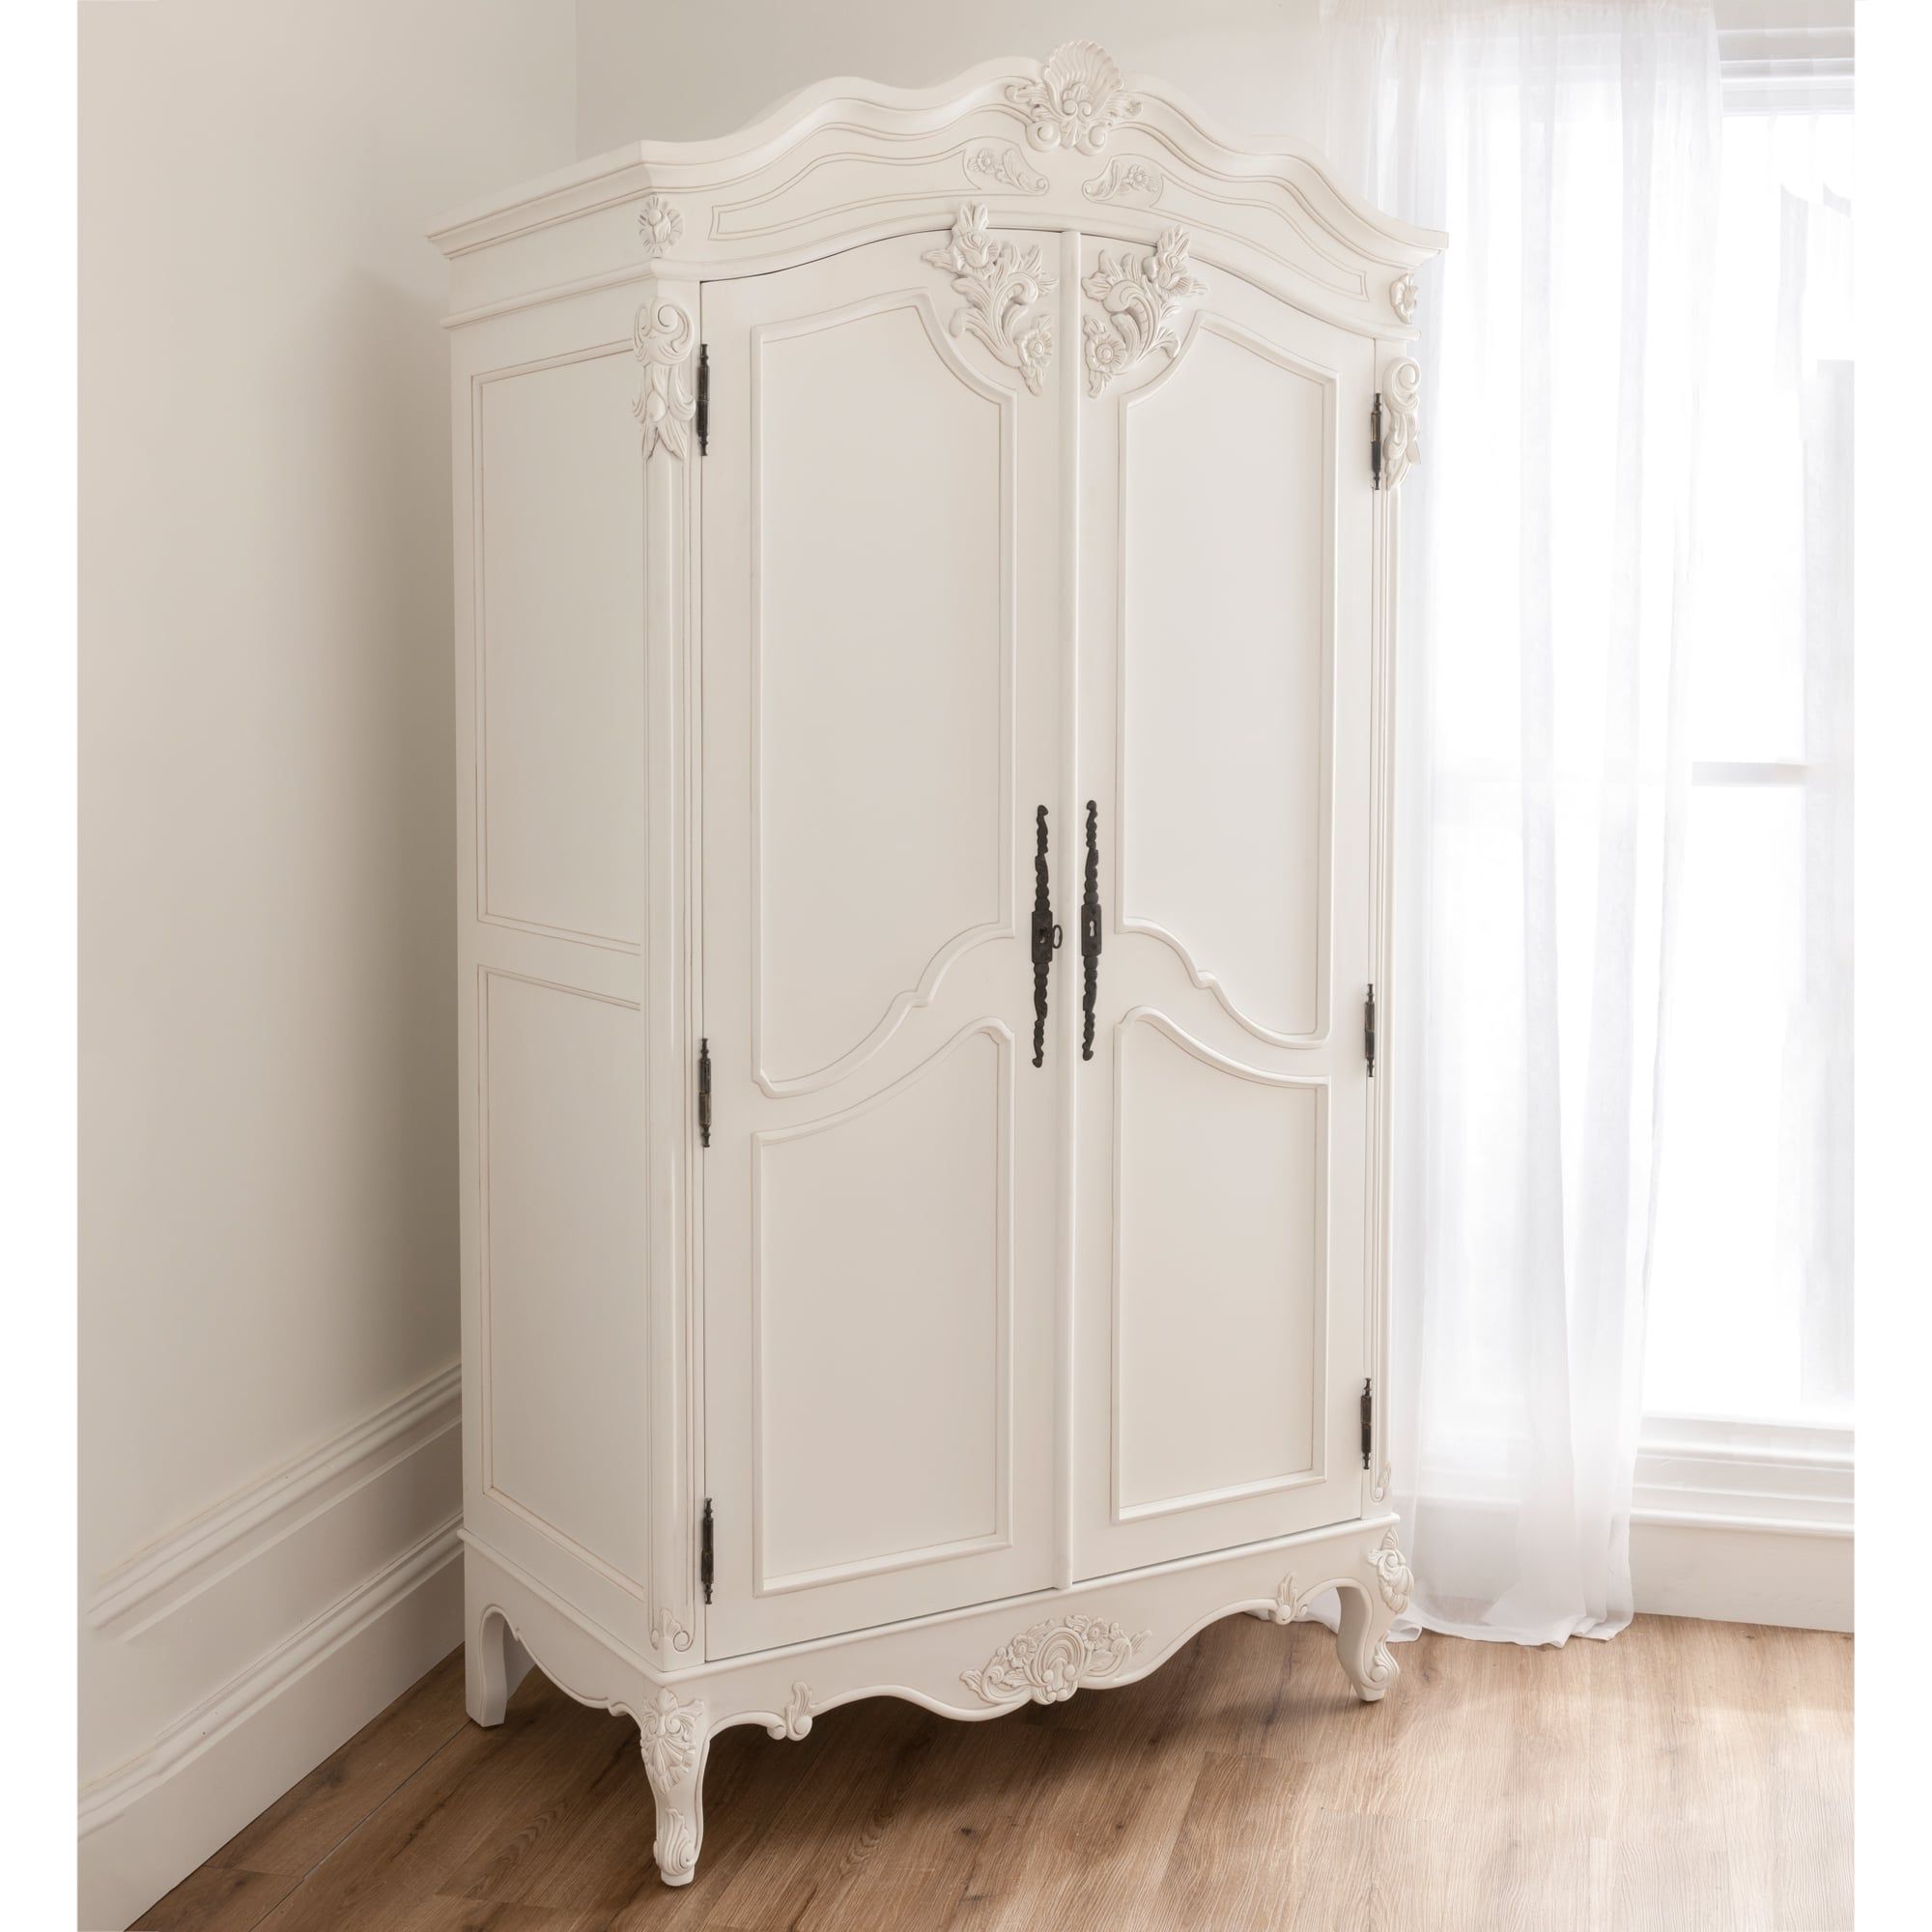 Baroque Antique French Wardrobe Is Available Online At Homesdirect365 Pertaining To French Style Armoires Wardrobes (View 4 of 20)